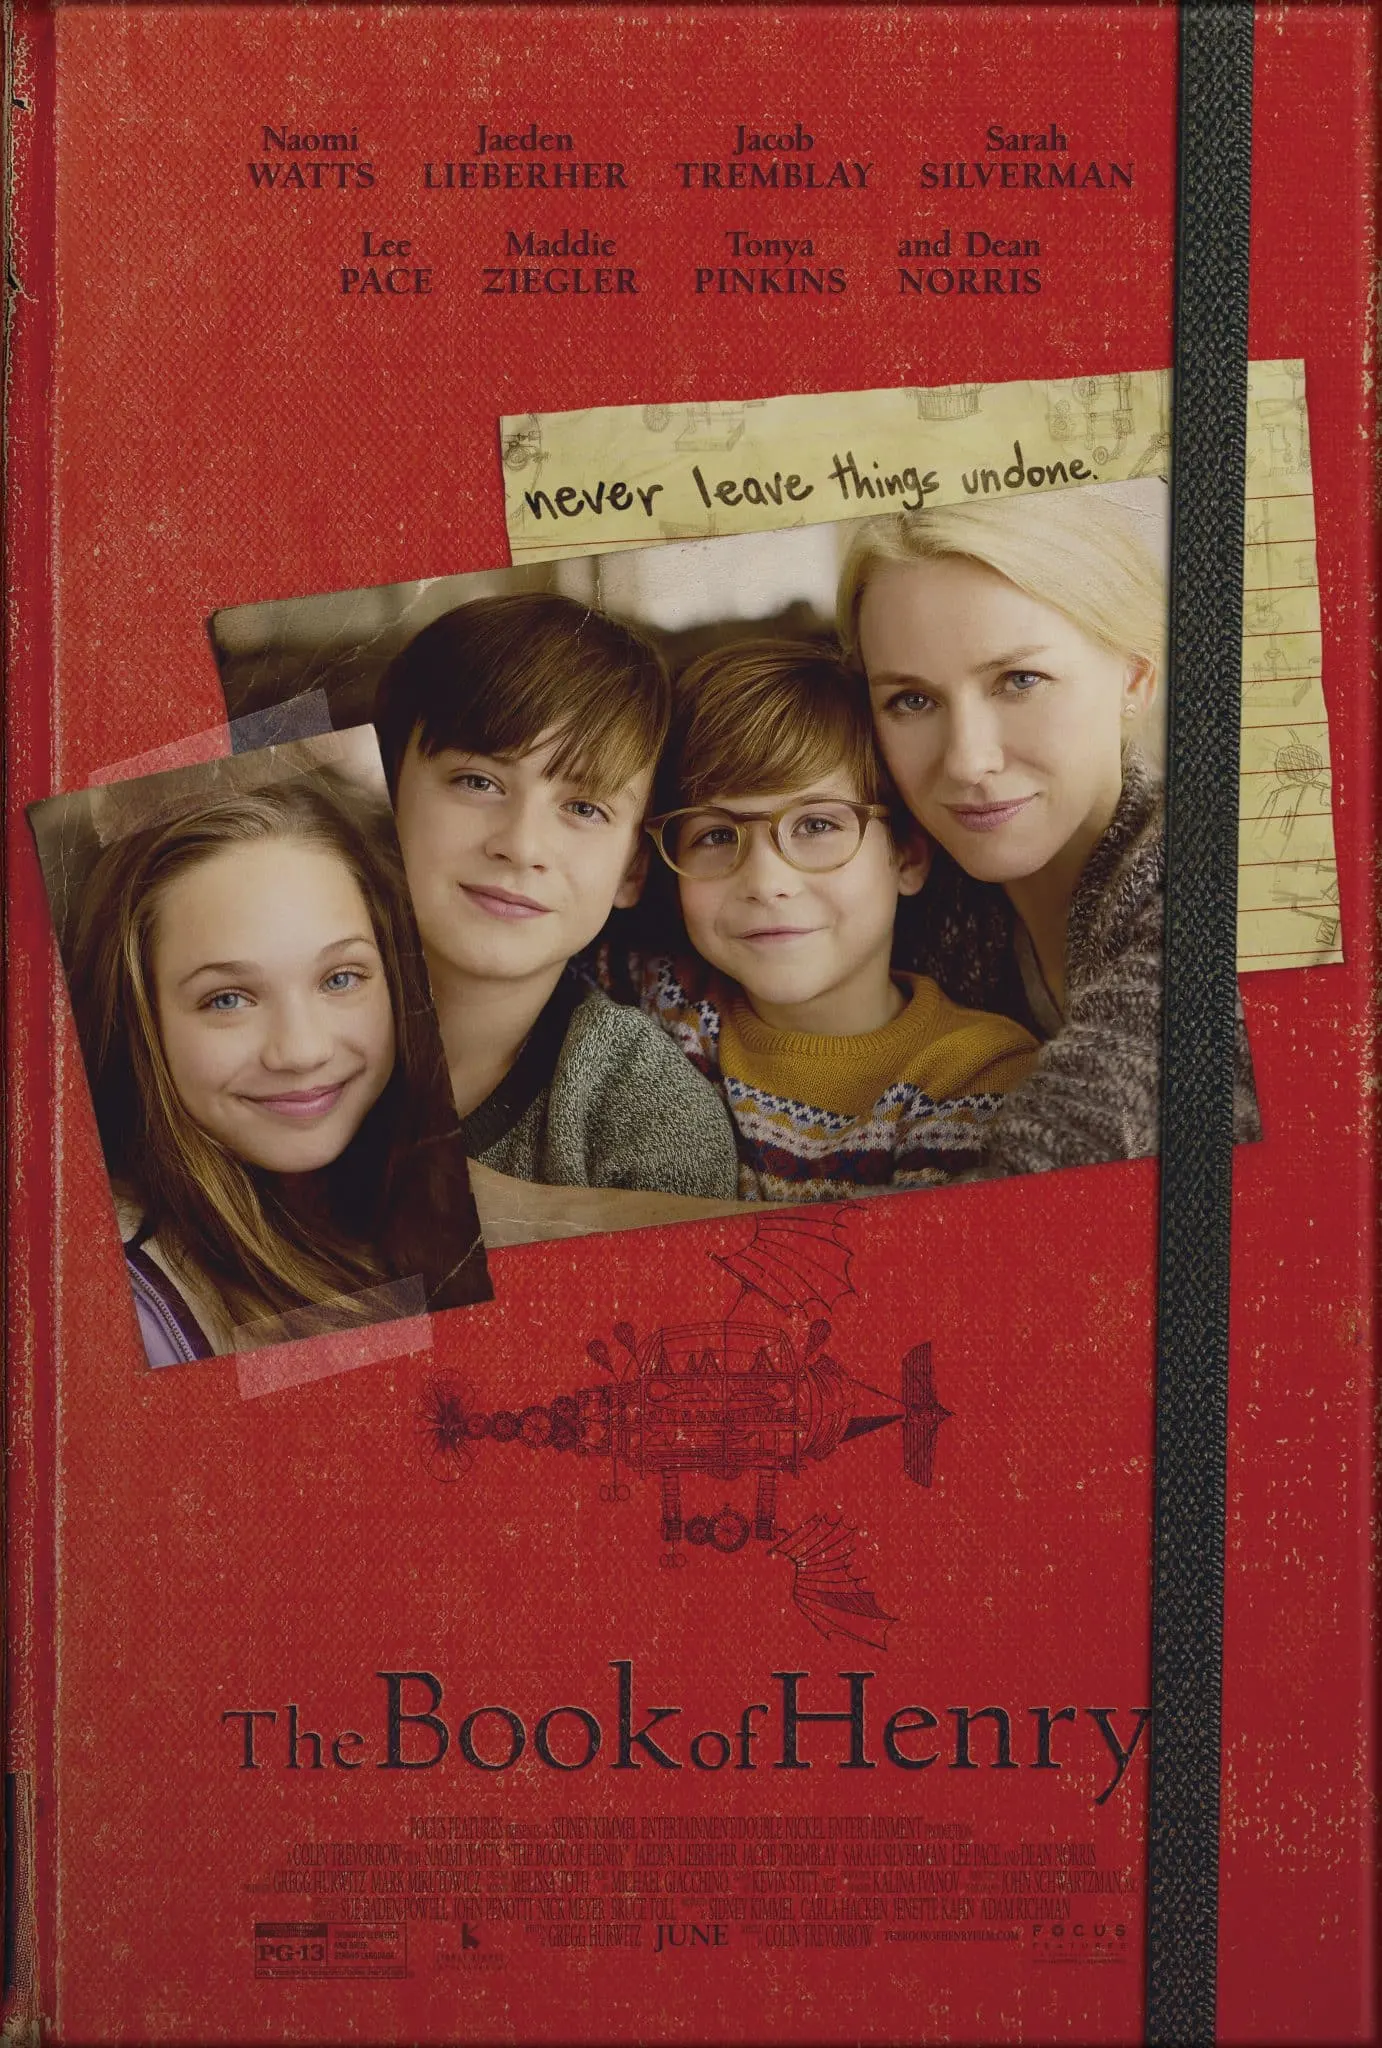 New Official Key-Art for The Book of Henry